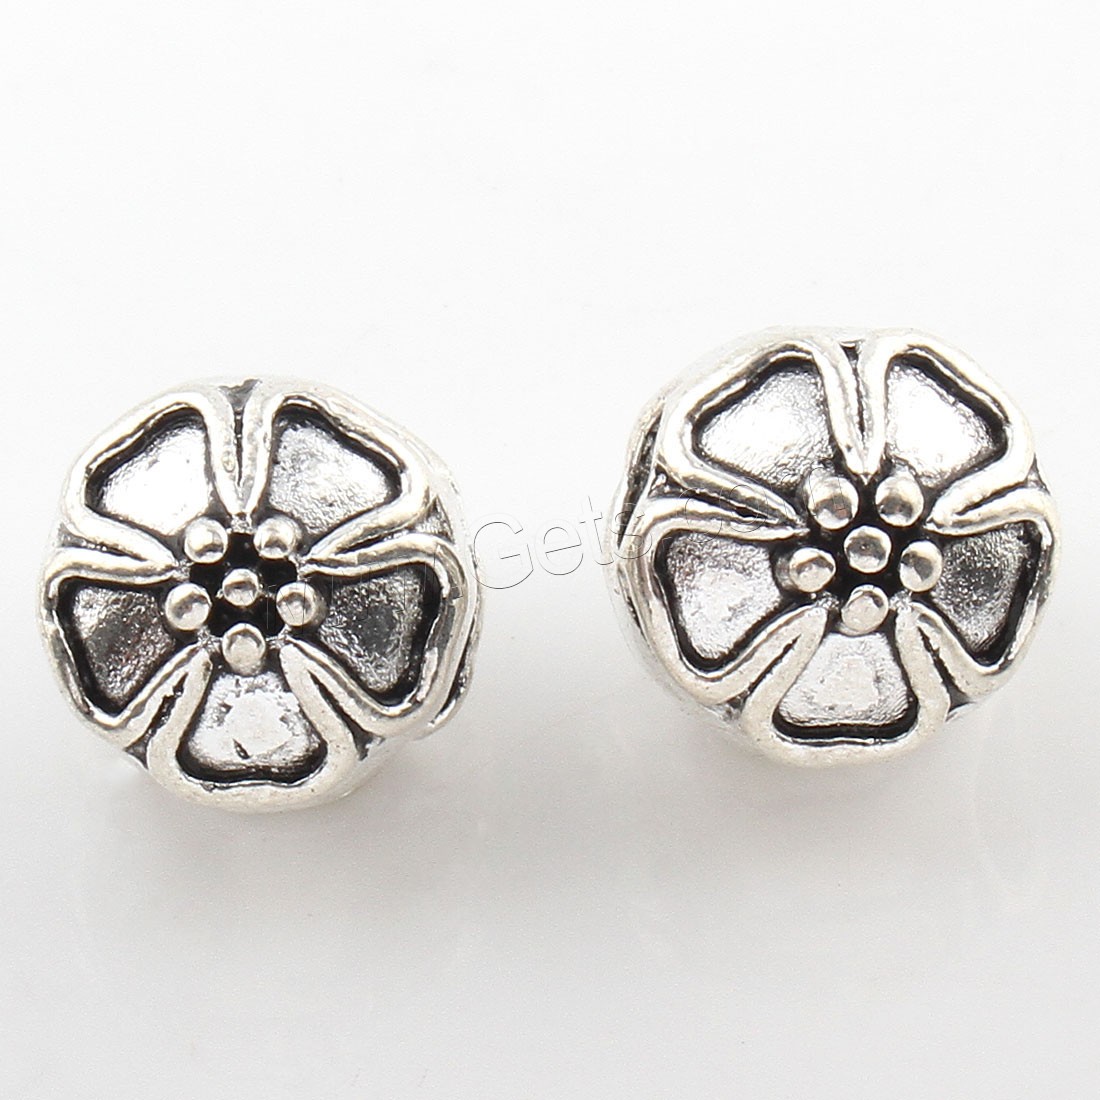 Zinc Alloy Flower Beads, antique silver color plated, 11x9mm, Hole:Approx 4mm, Approx 88PCs/Bag, Sold By Bag